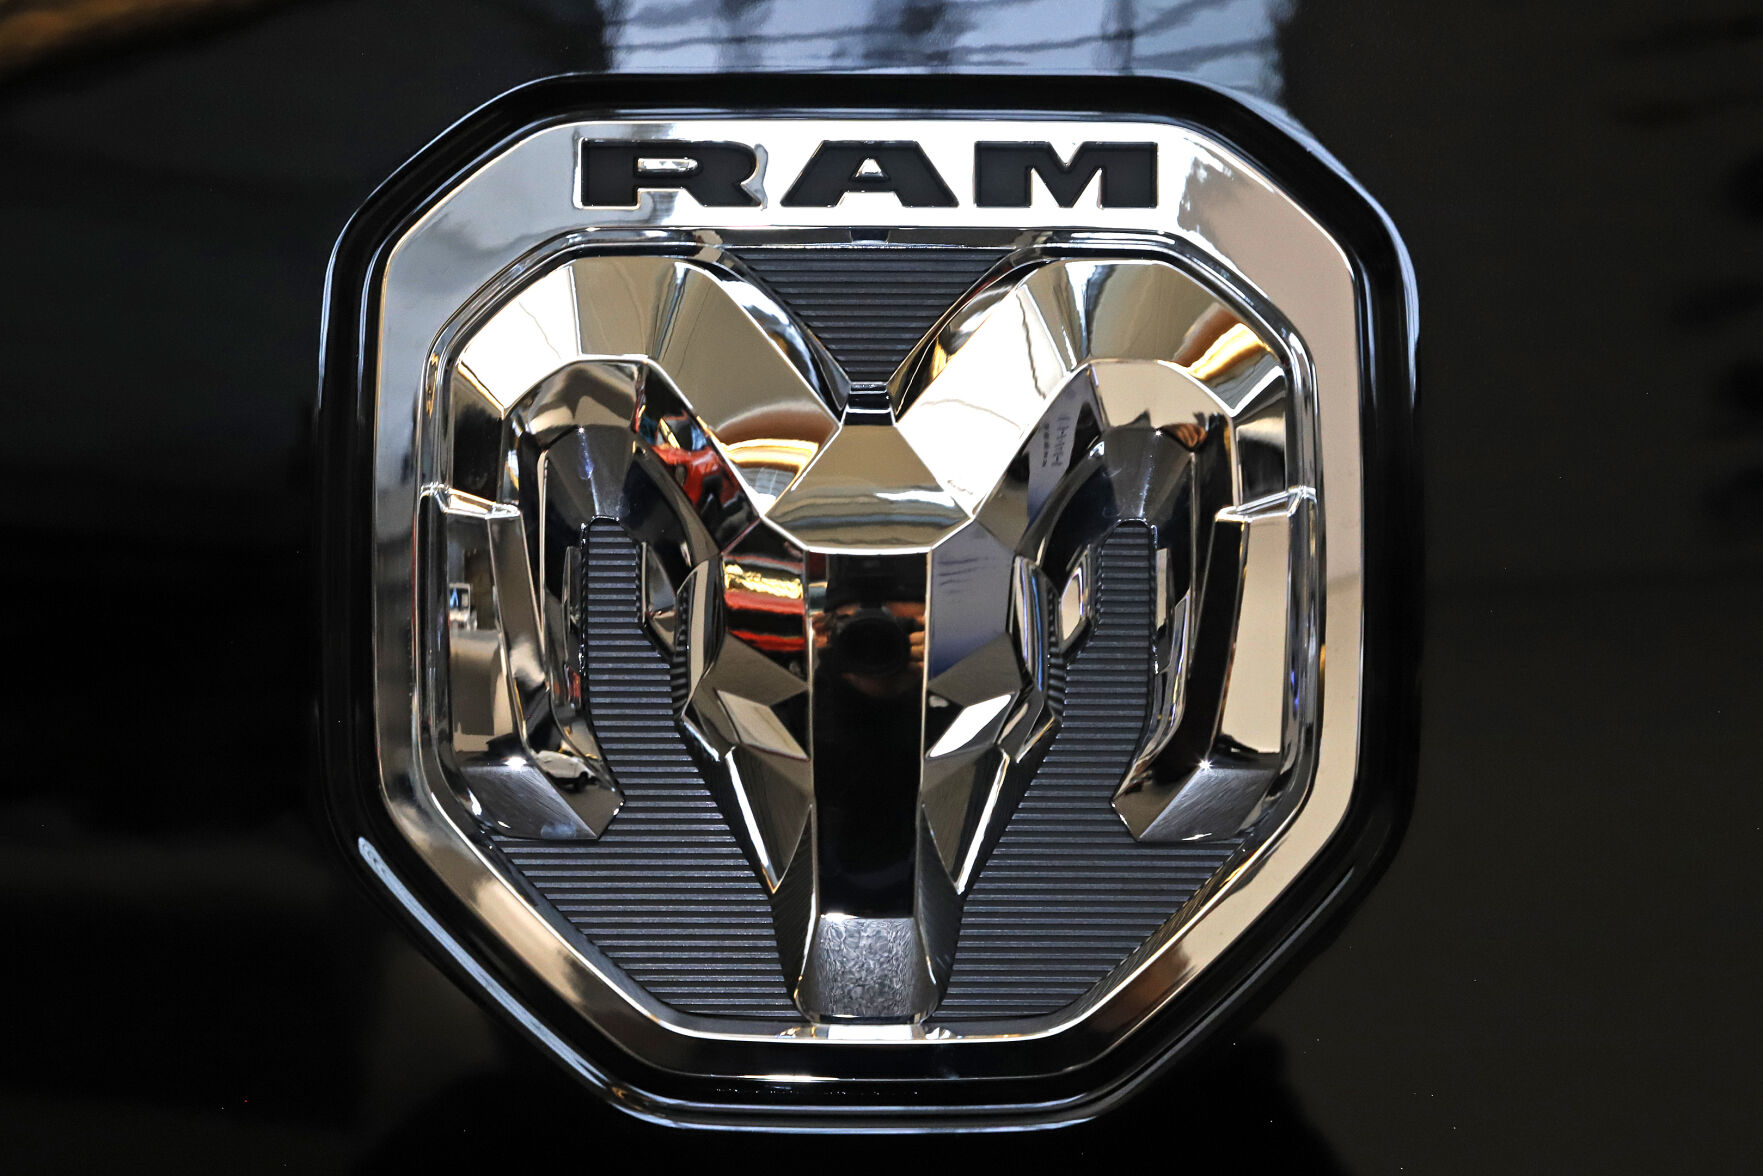 <p>FILE - This is the 2020 Ram truck logo on display at the 2020 Pittsburgh International Auto Show Thursday, Feb.13, 2020 in Pittsburgh. Stellantis is recalling nearly 250,000 heavy duty diesel Ram trucks in the U.S., Thursday, Nov. 17, 2022 because transmission fluid can leak and cause engine fires. The recall covers certain 2020 to 2023 Ram 2500 and some 2020 through 2022 Ram 3500 trucks. (AP Photo/Gene J. Puskar, File)</p>   PHOTO CREDIT: Gene J. Puskar 